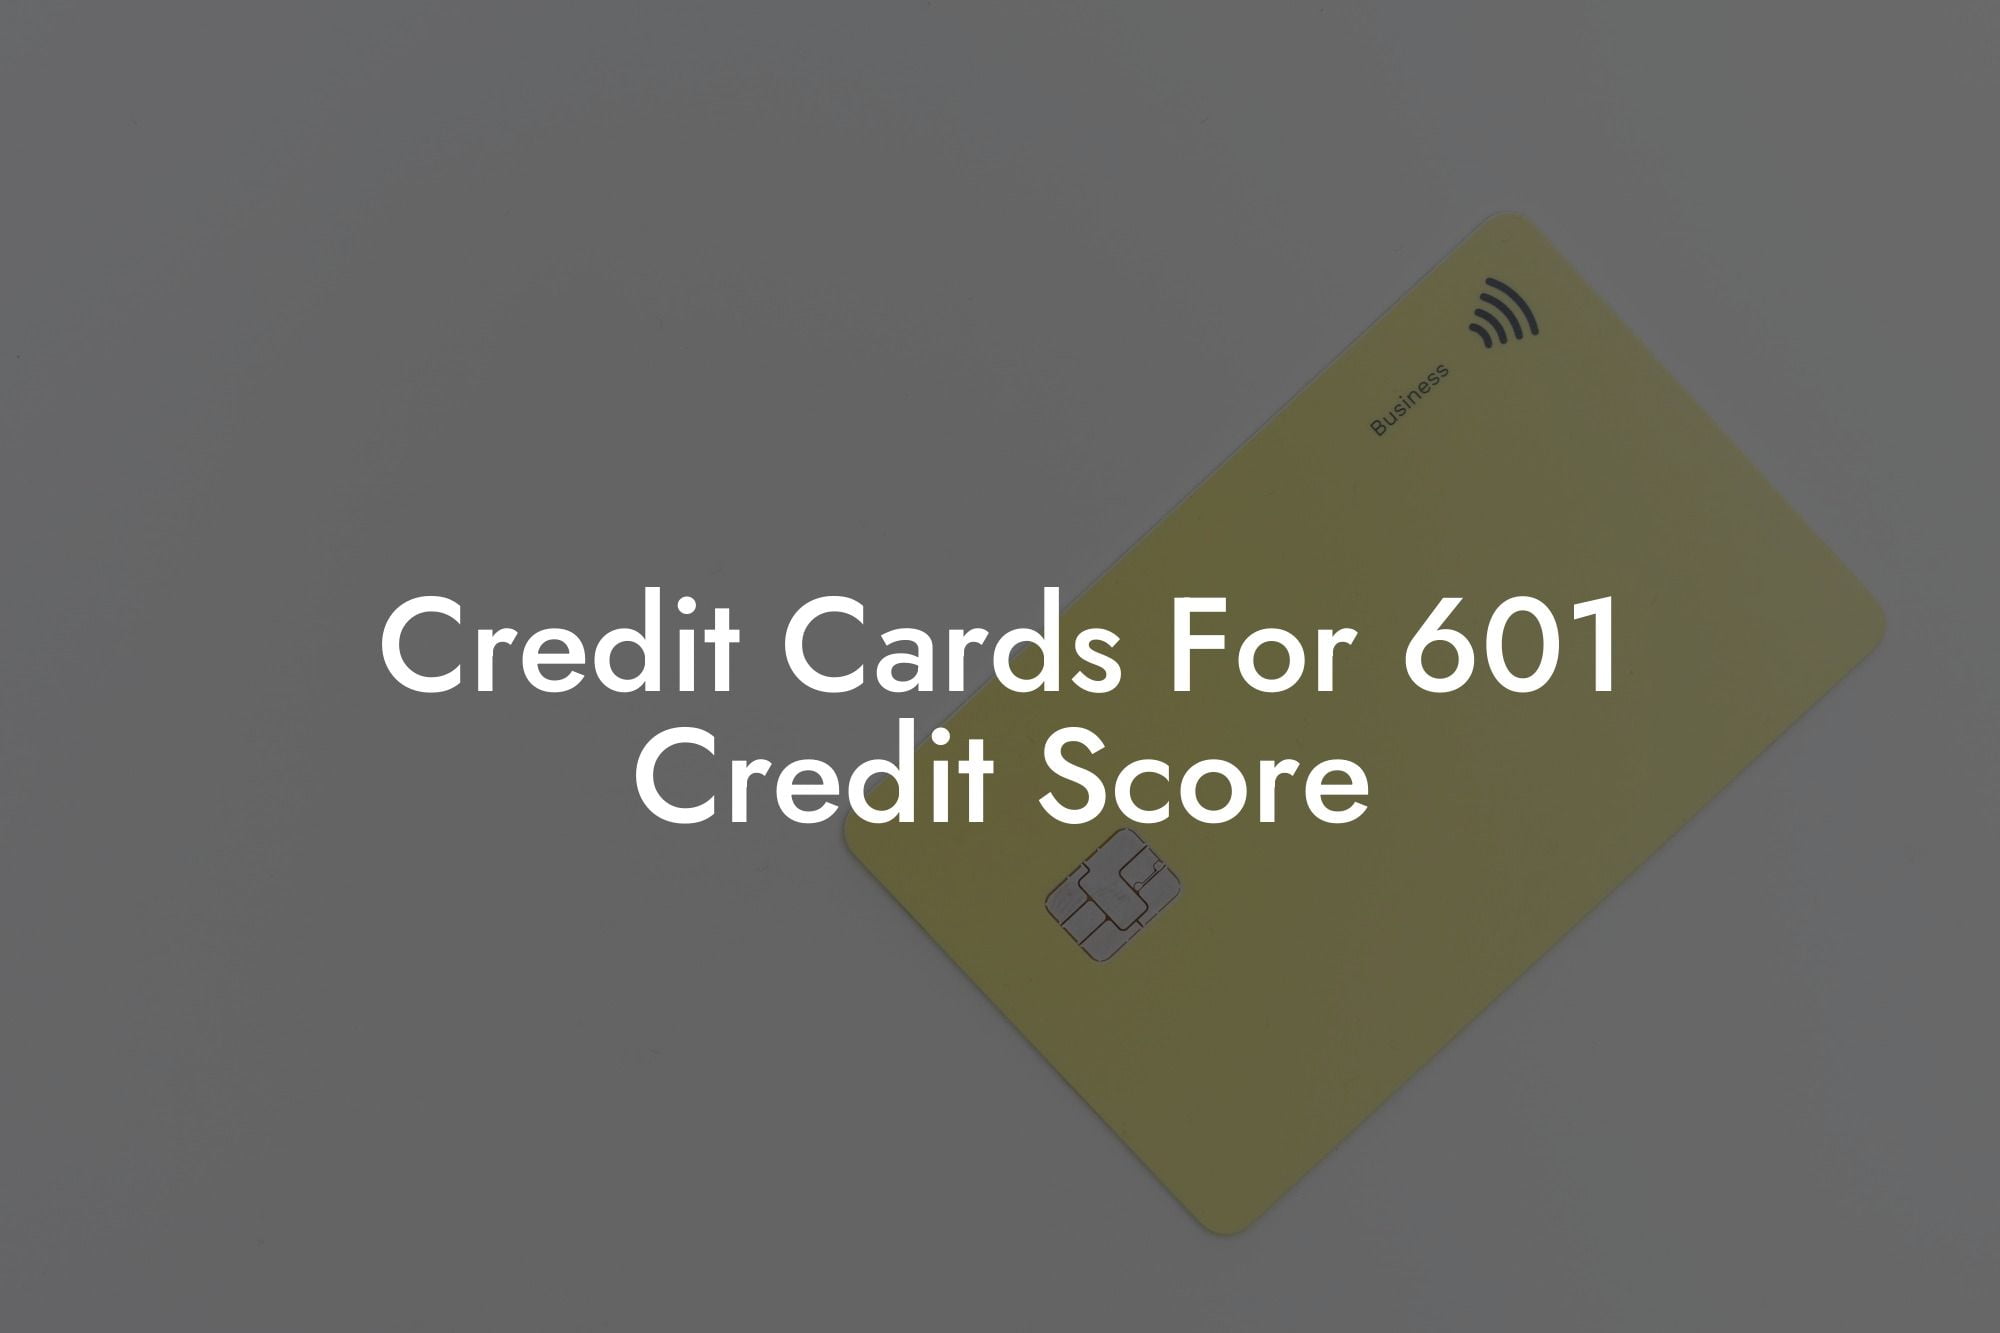 Credit Cards For 601 Credit Score